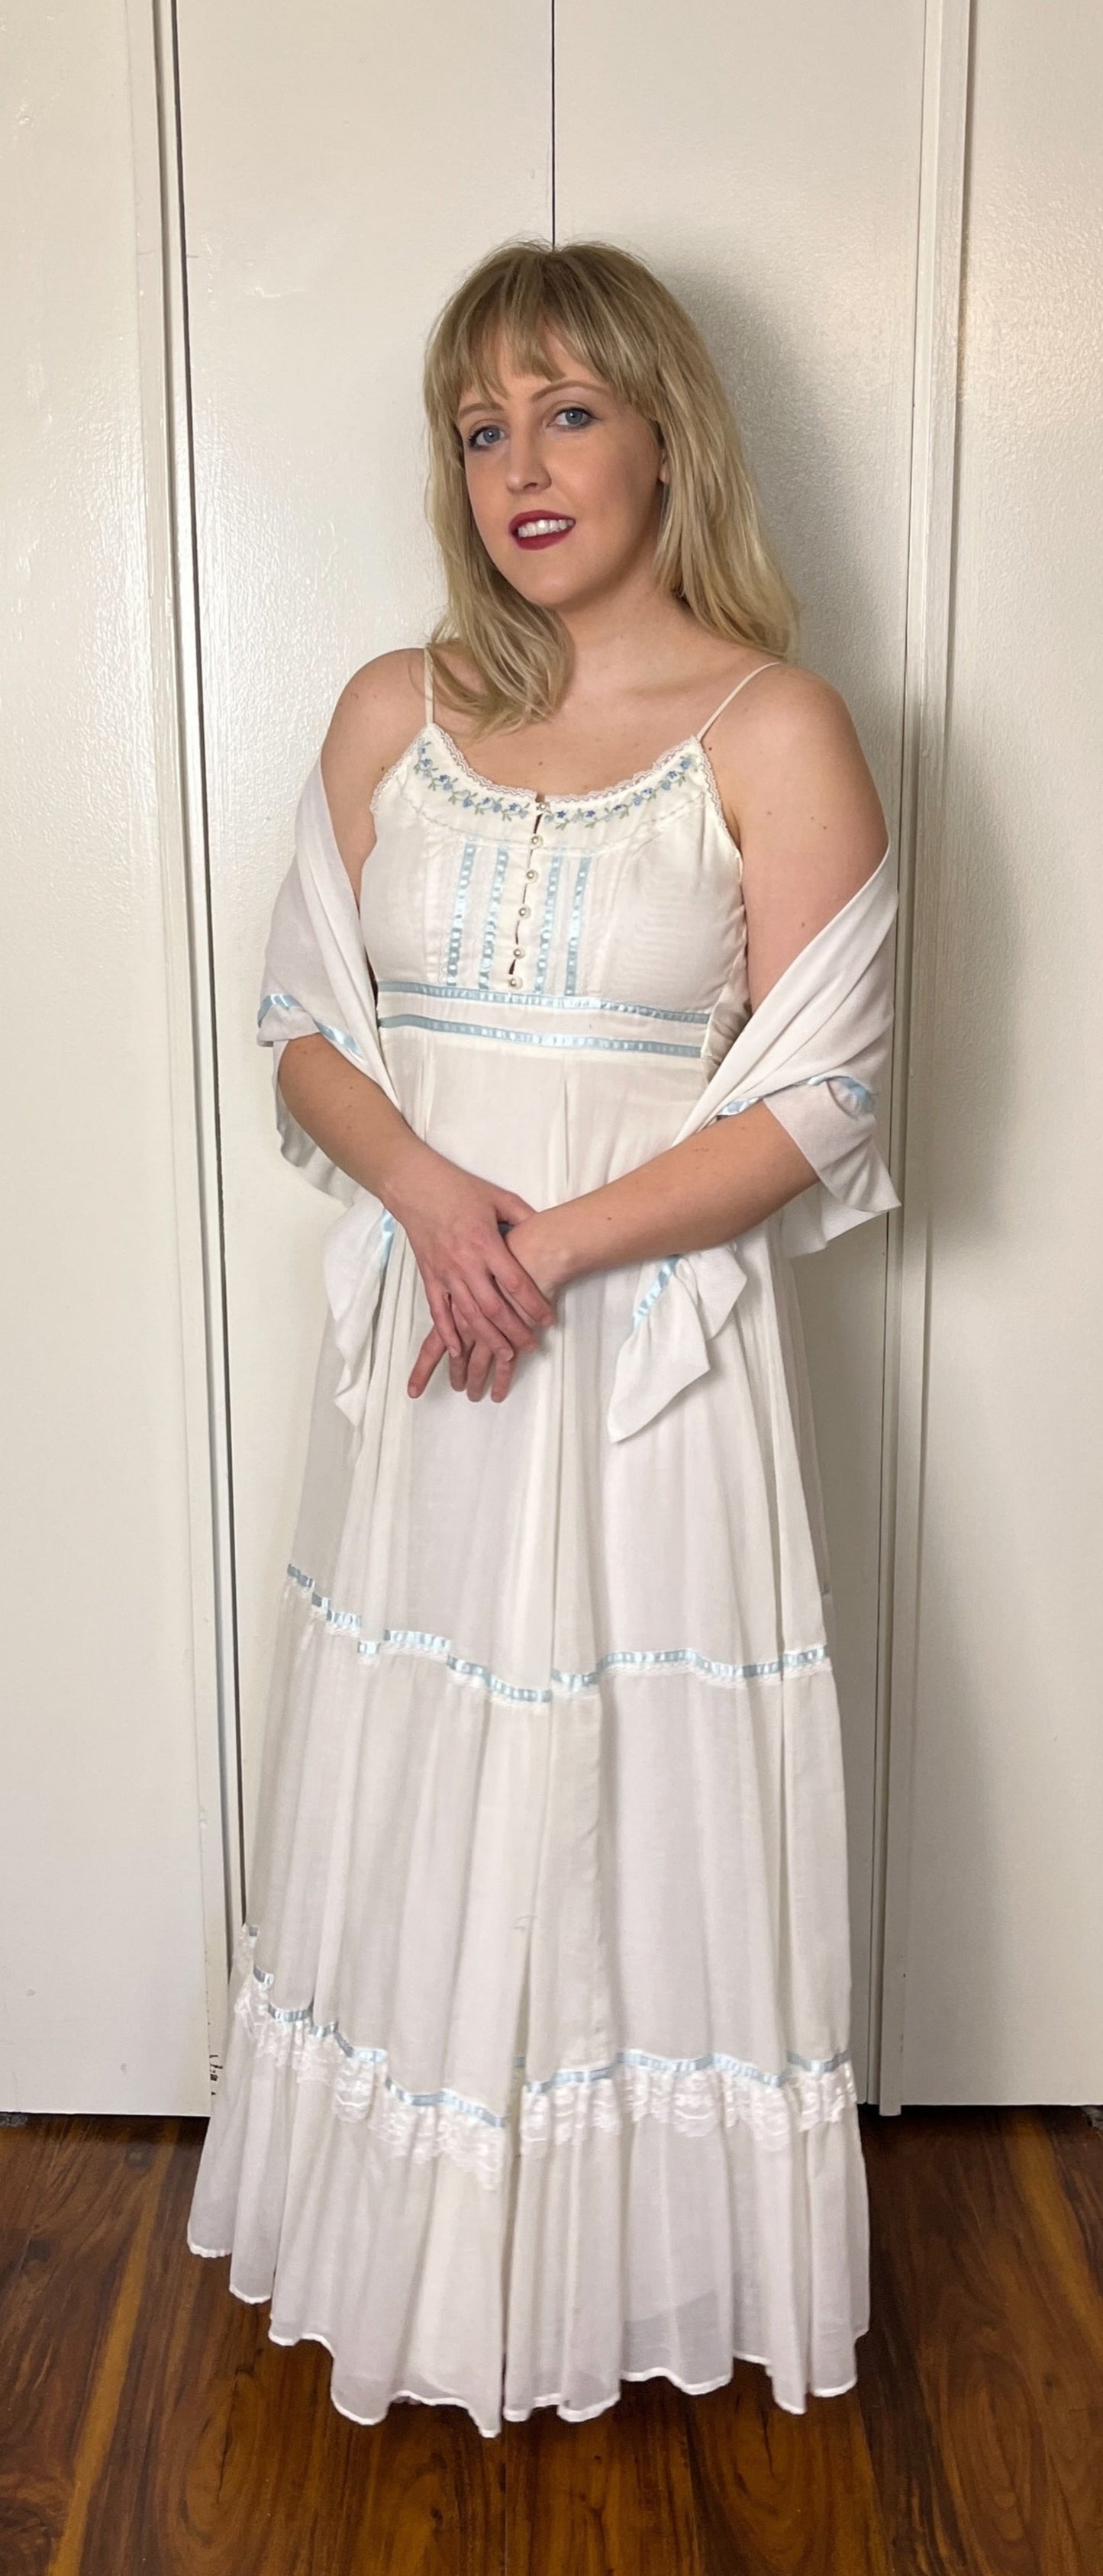 Vintage 1970's "Gunne Sax by Jessica McClintock" White with Blue Flowers Button-Front Maxi Sundress